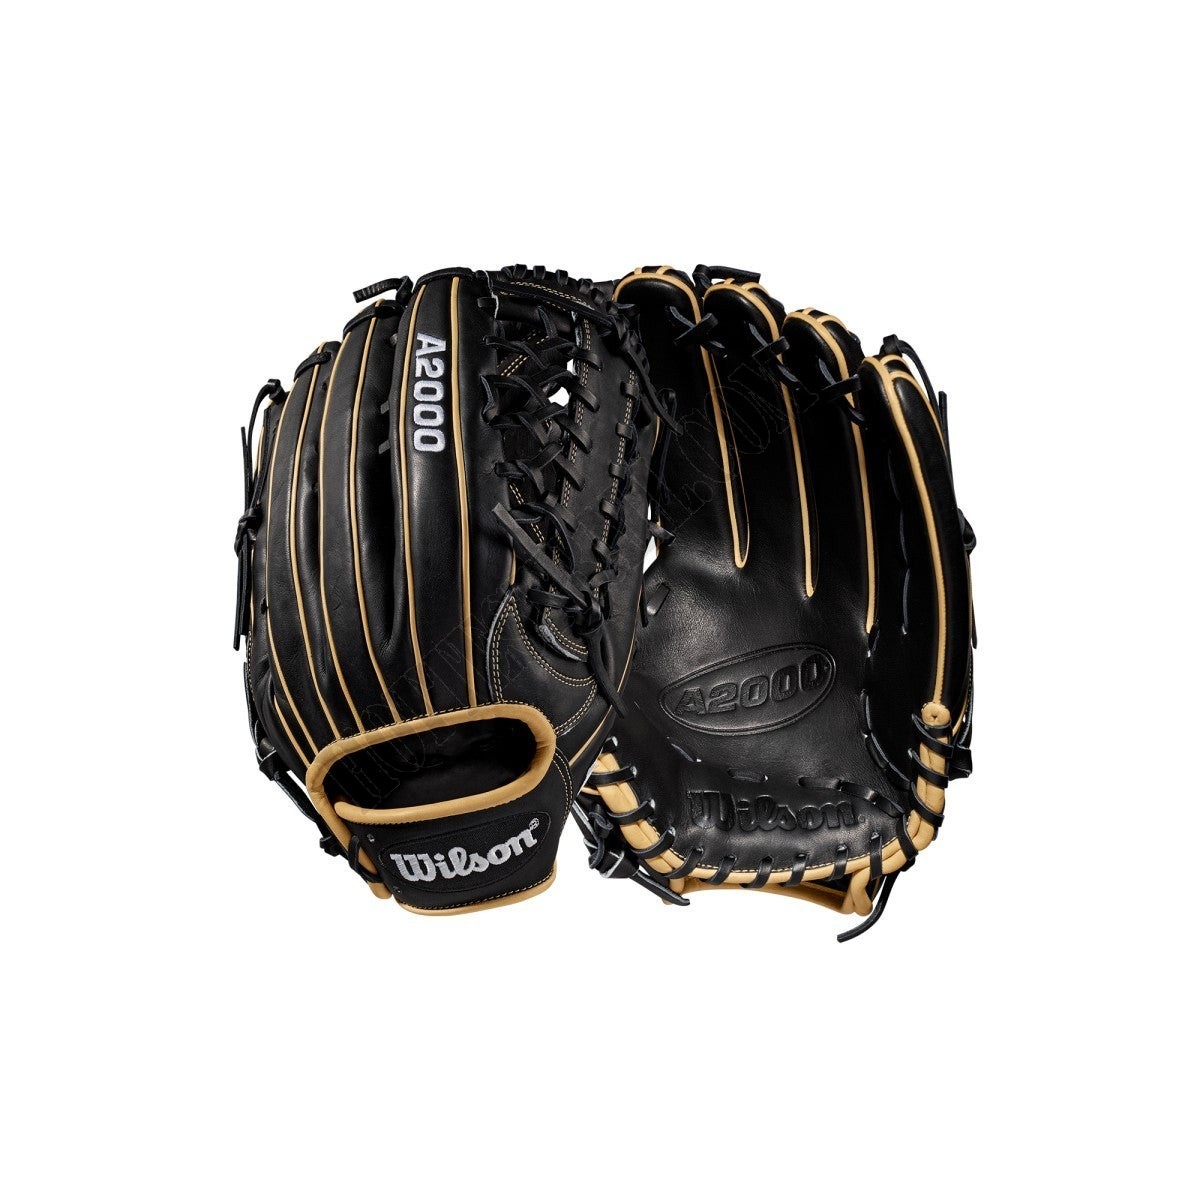 2019 A2000 KP92 12.5" Outfield Baseball Glove ● Wilson Promotions - -0